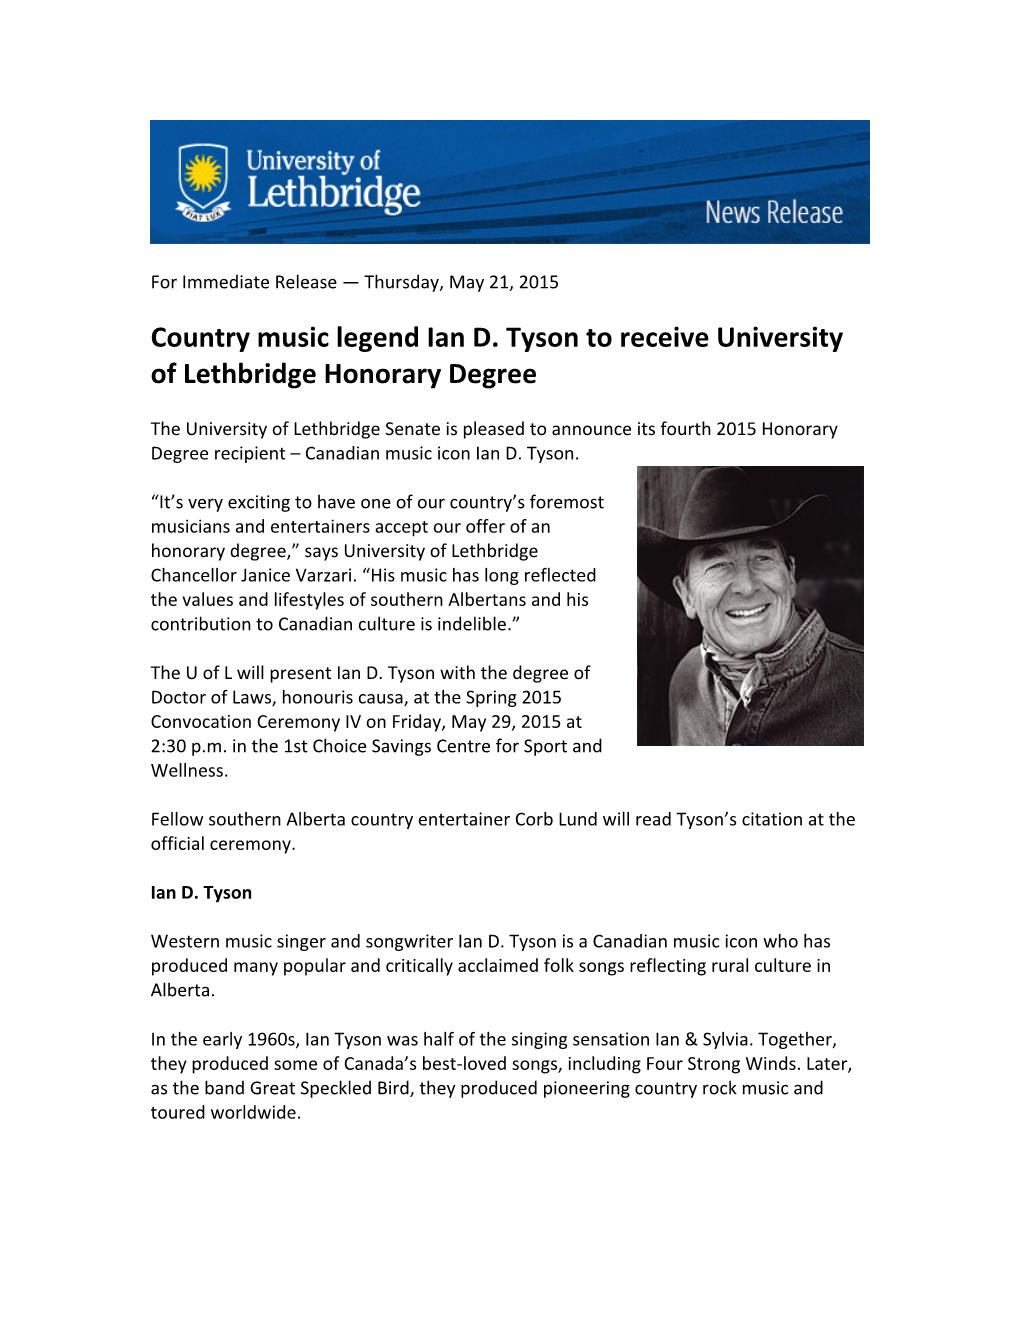 Country Music Legend Ian D. Tyson to Receive University of Lethbridge Honorary Degree